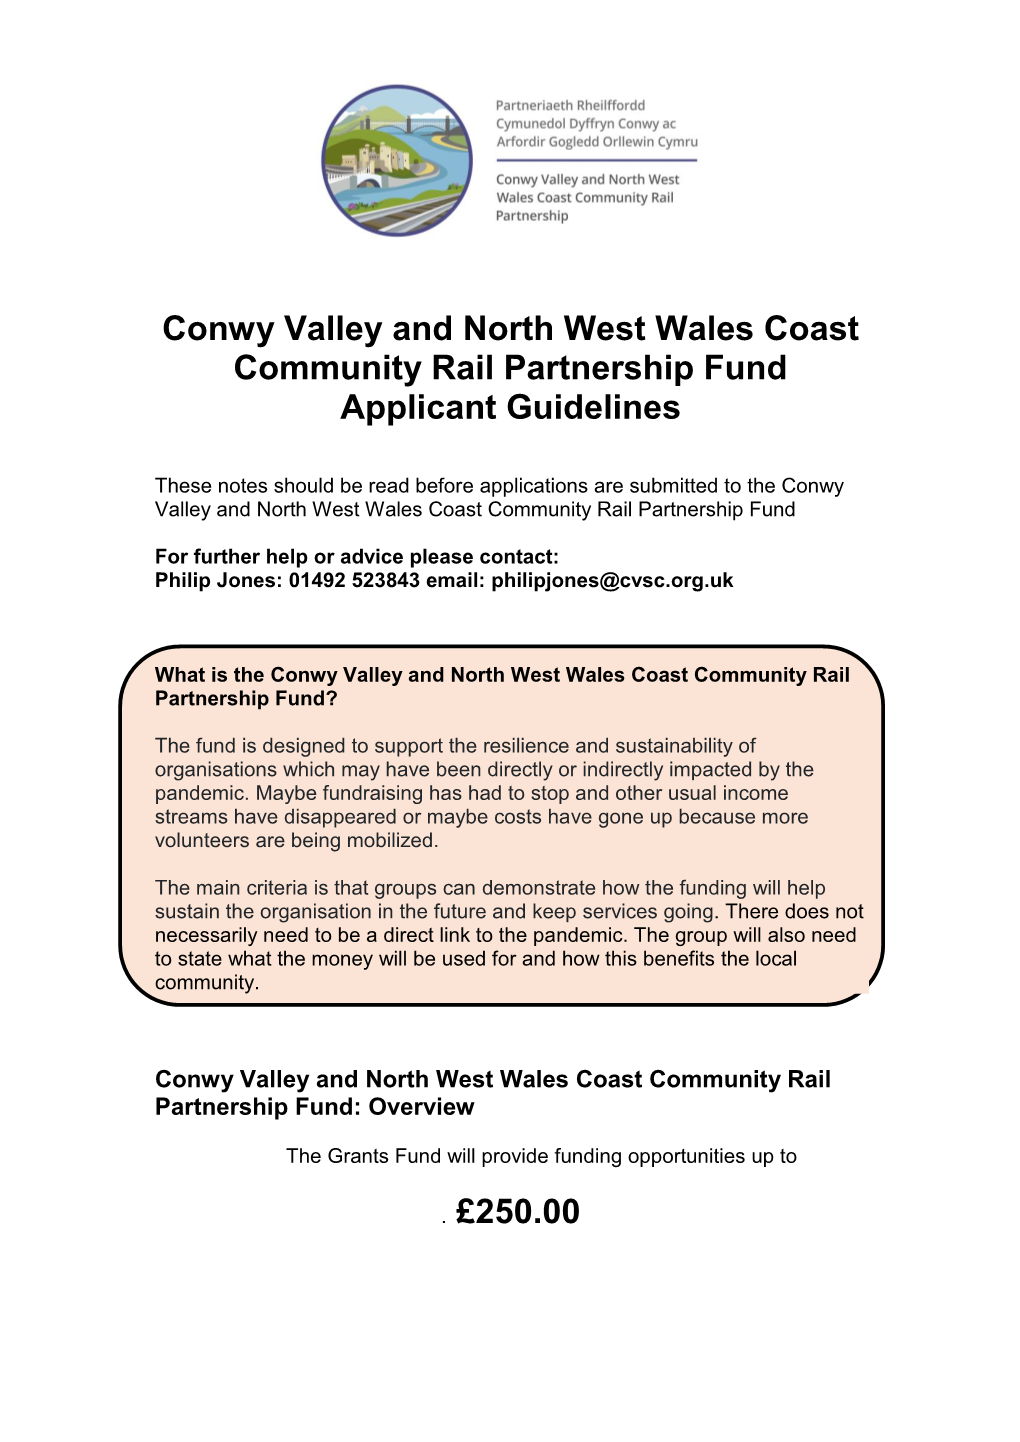 Conwy Valley and North West Wales Coast Community Rail Partnership Fund Applicant Guidelines